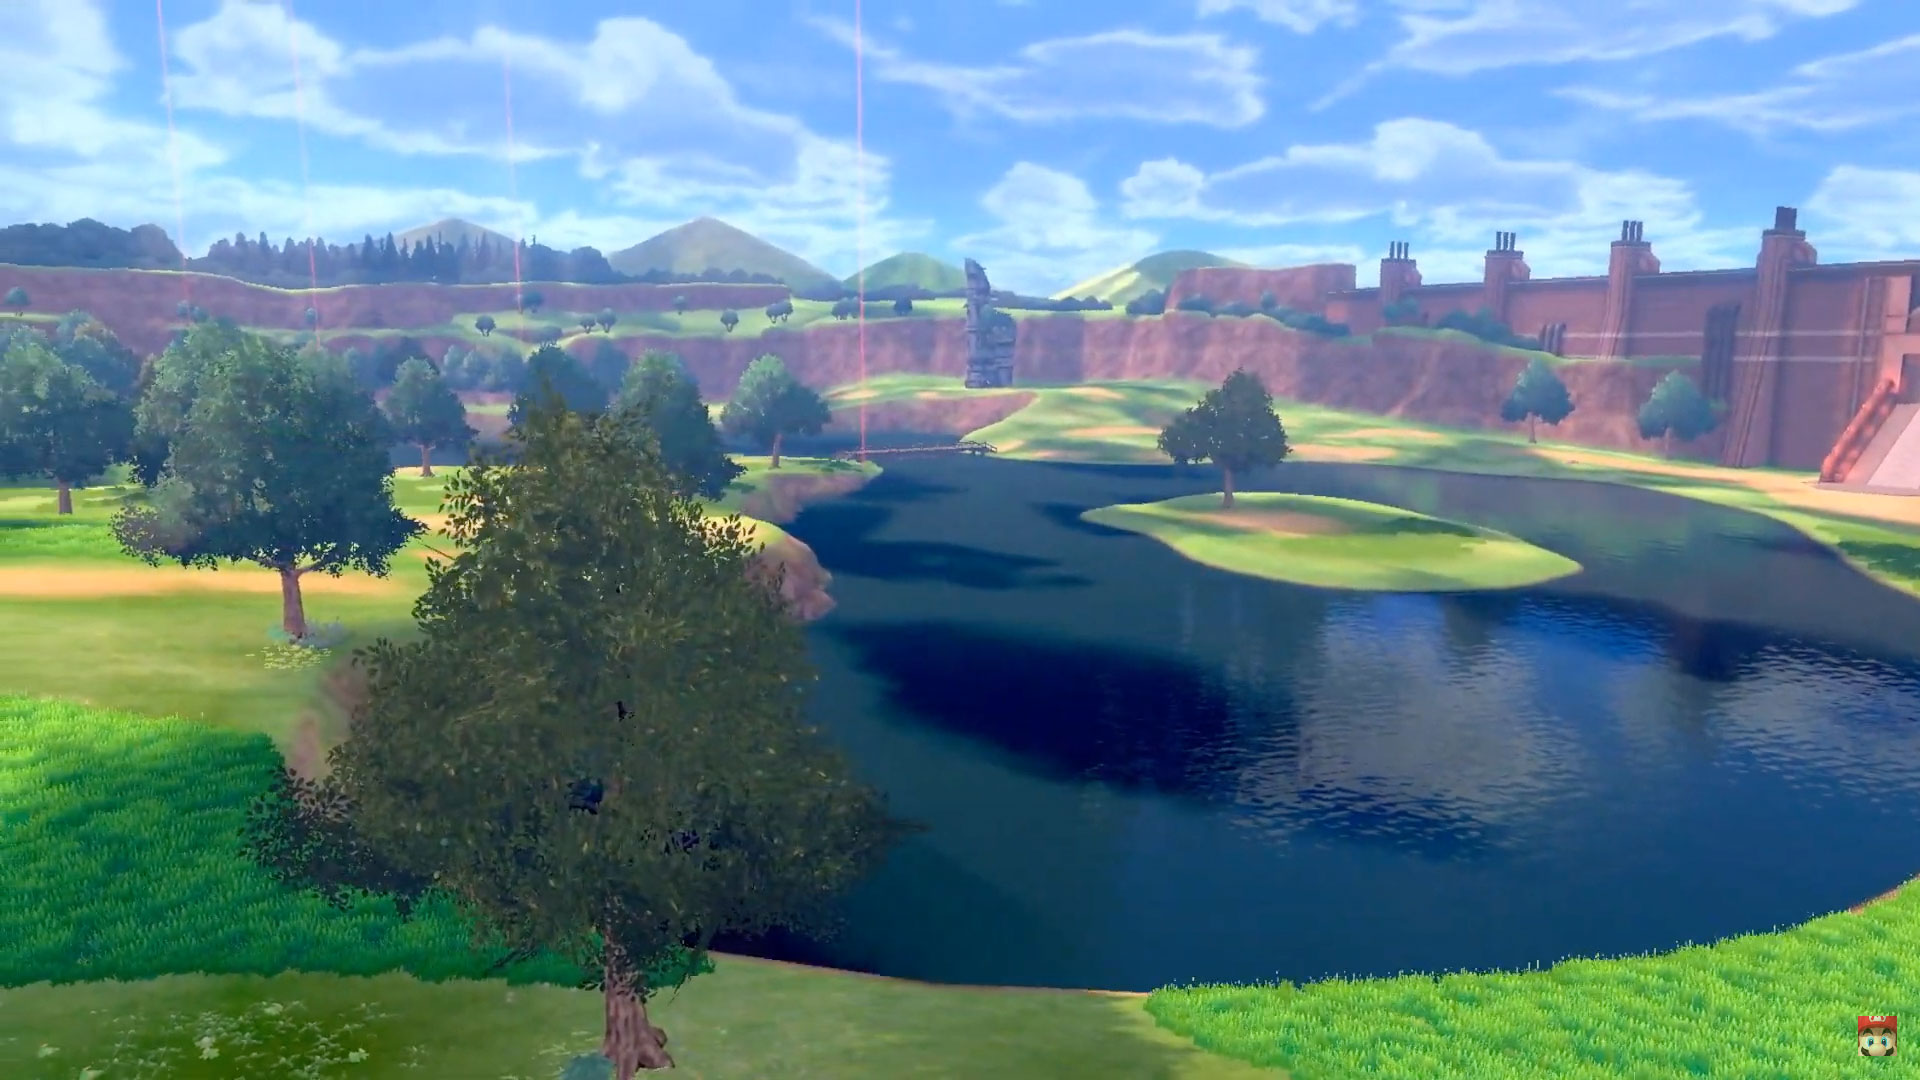 New Pokemon Sword and Shield trailer reveals a tonne of new features including new Dynamax battle mode